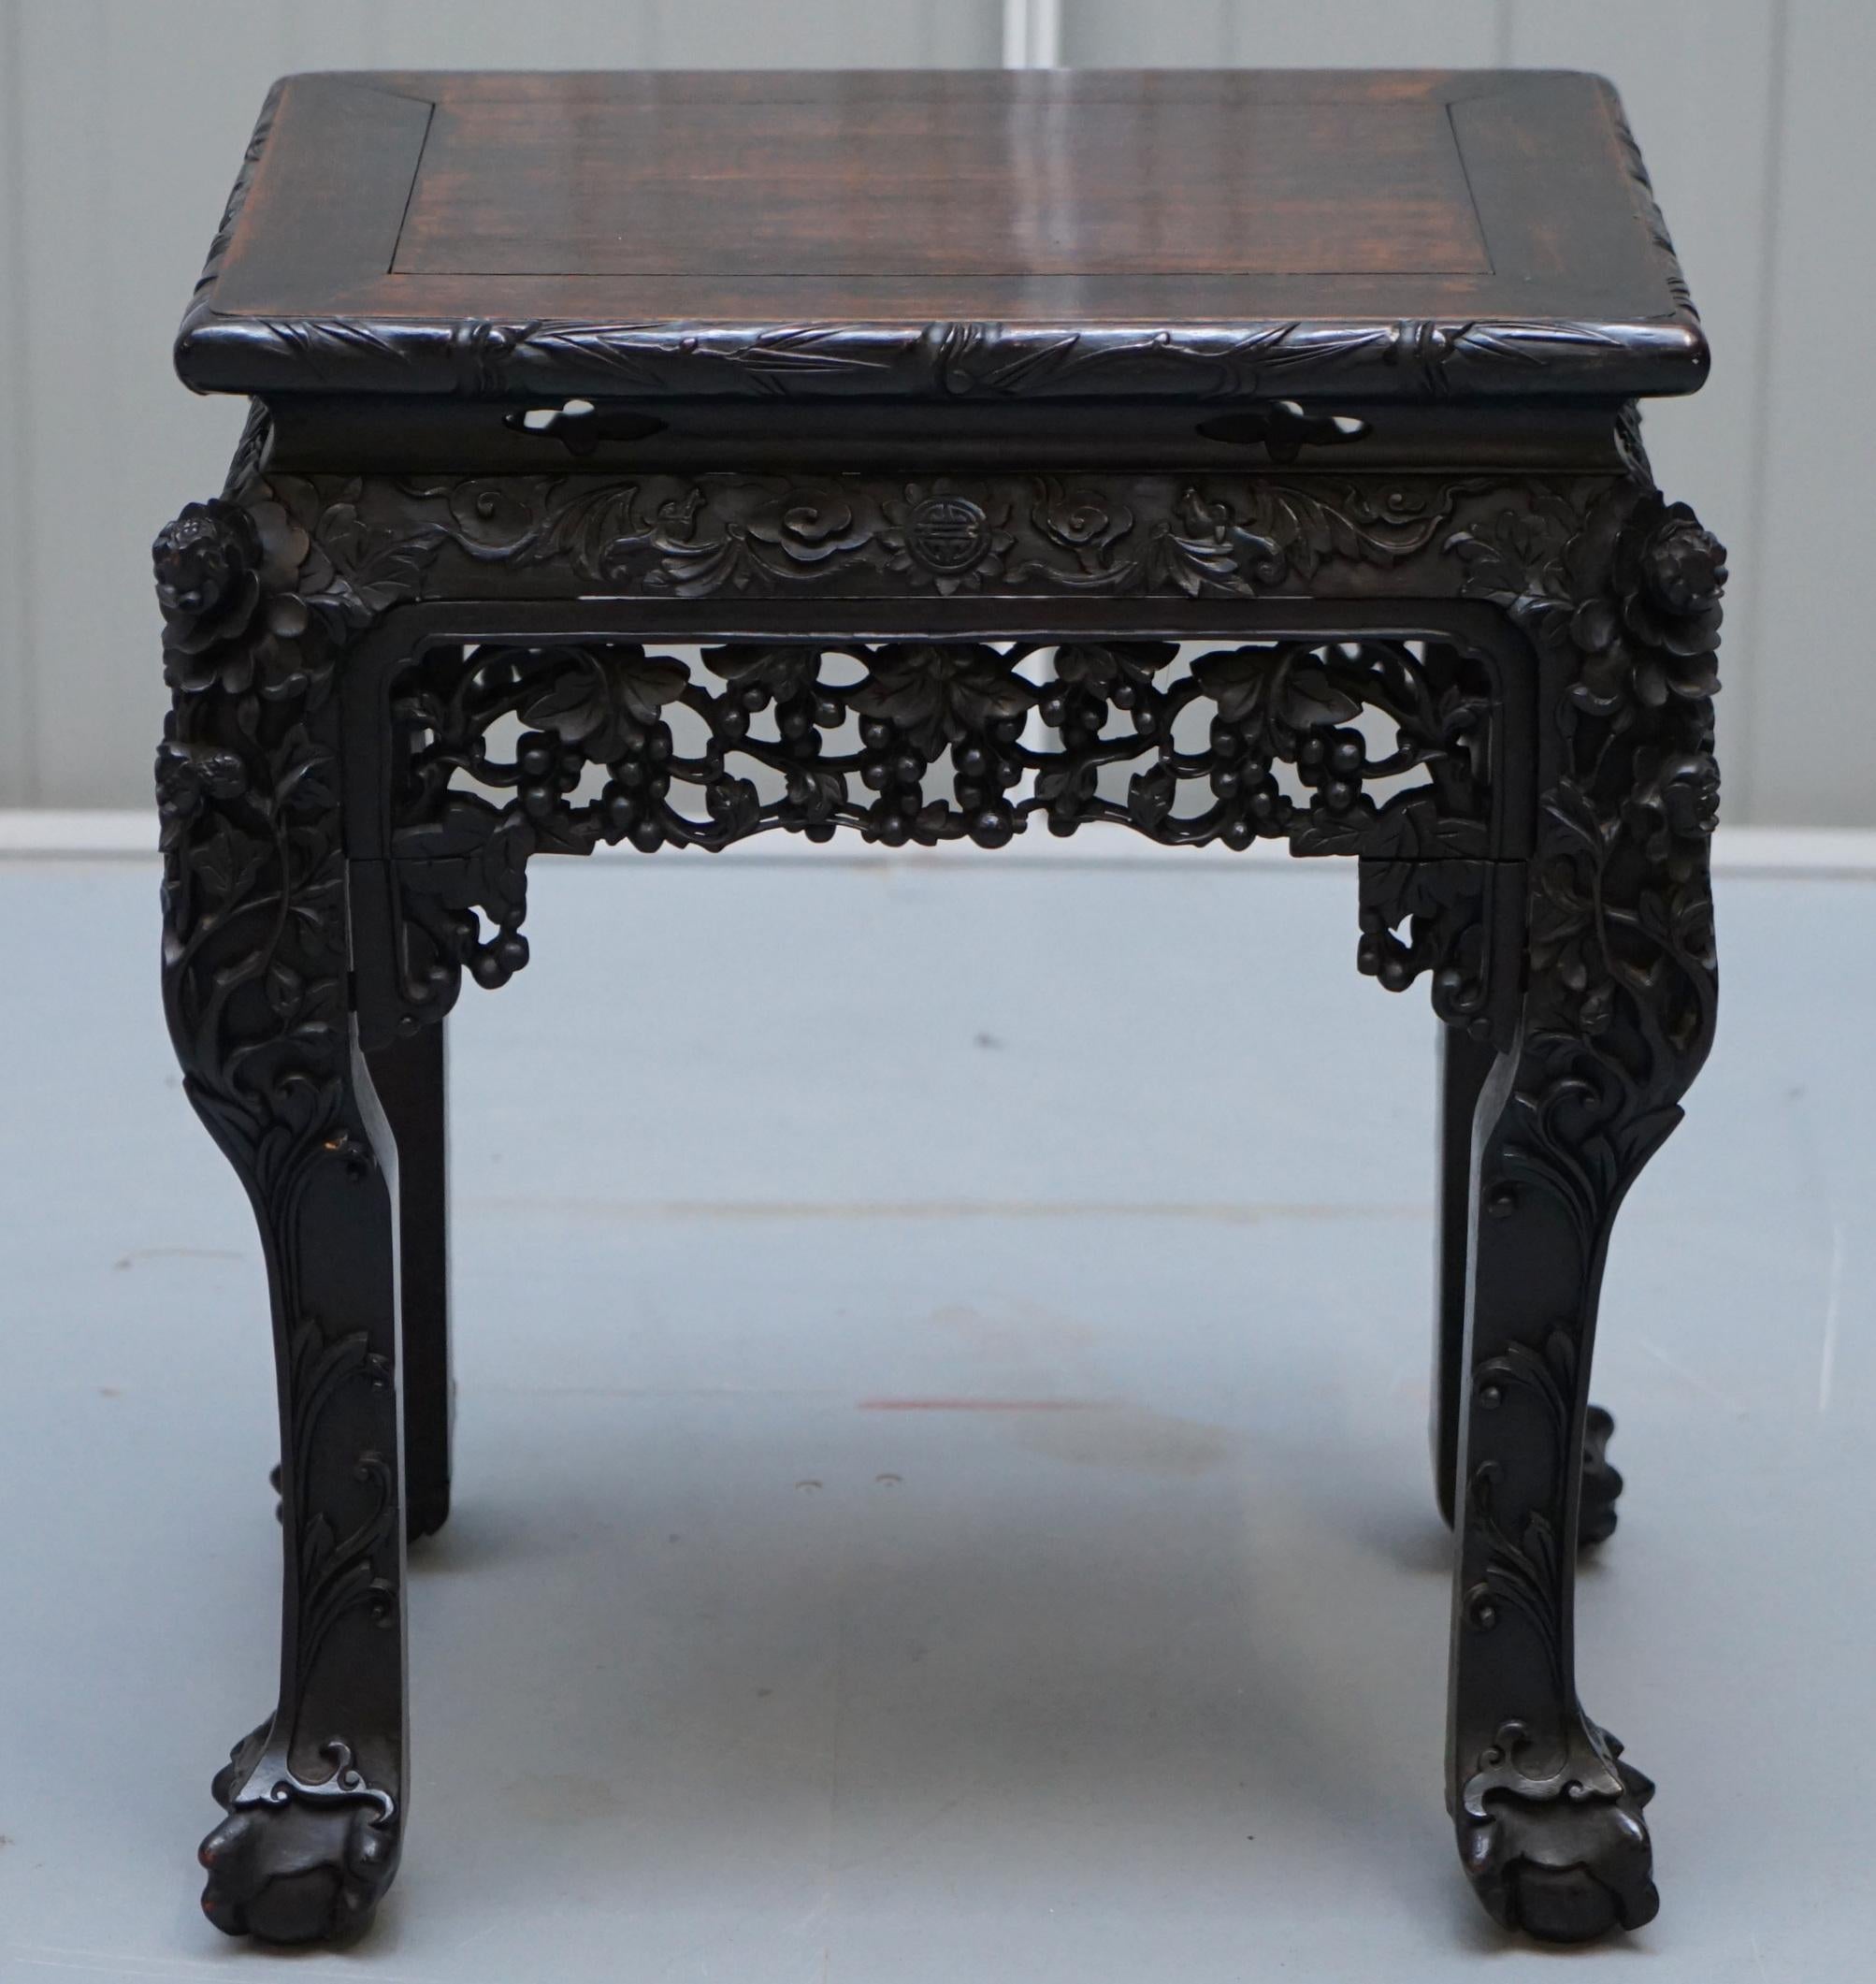 We are delighted to offer for sale this stunning and very rare 19th century hand carved Chinese Qing Dynasty Hongmu stand

A very good looking well made collectable and decorative stand. It can be used as simply as a piece of art furniture, it’s